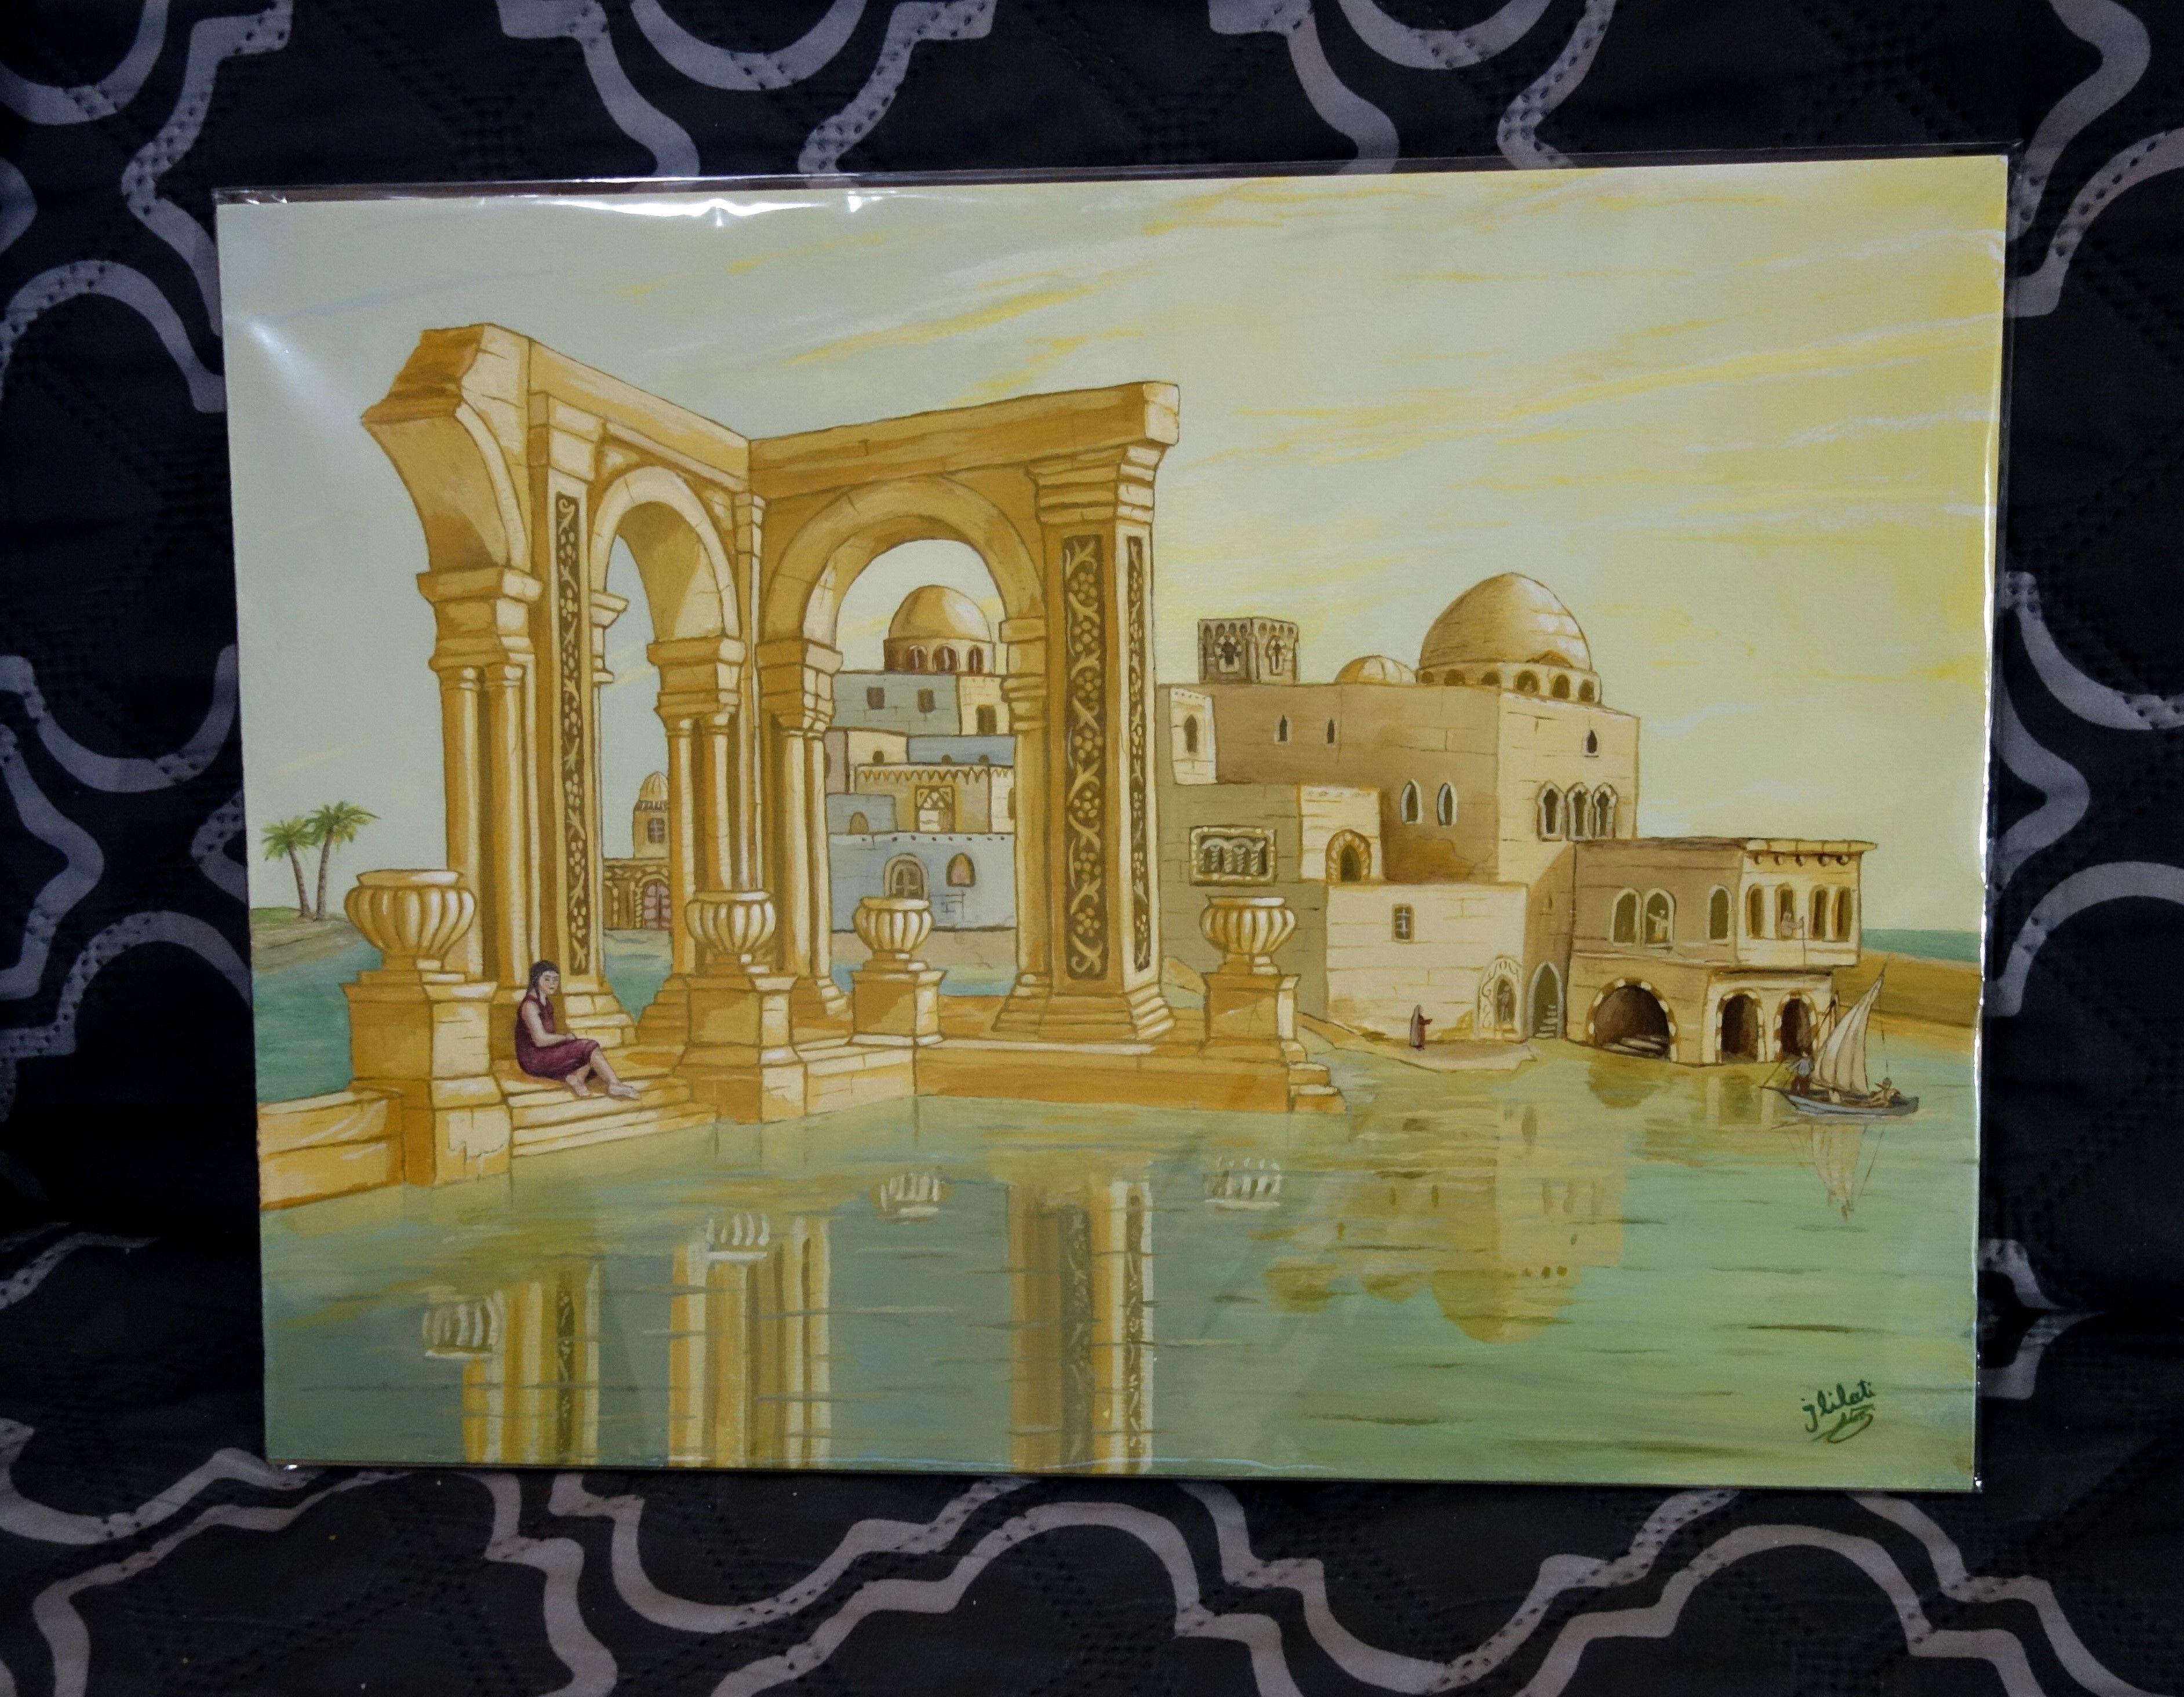 Mediterranean Dream  Original acrylic painting, Modern Art, landscape seascape Surrealism Egyptian oriental Architecture     :: Painting :: Classical :: This piece comes with an official certificate of authenticity signed by the artist :: Ready to